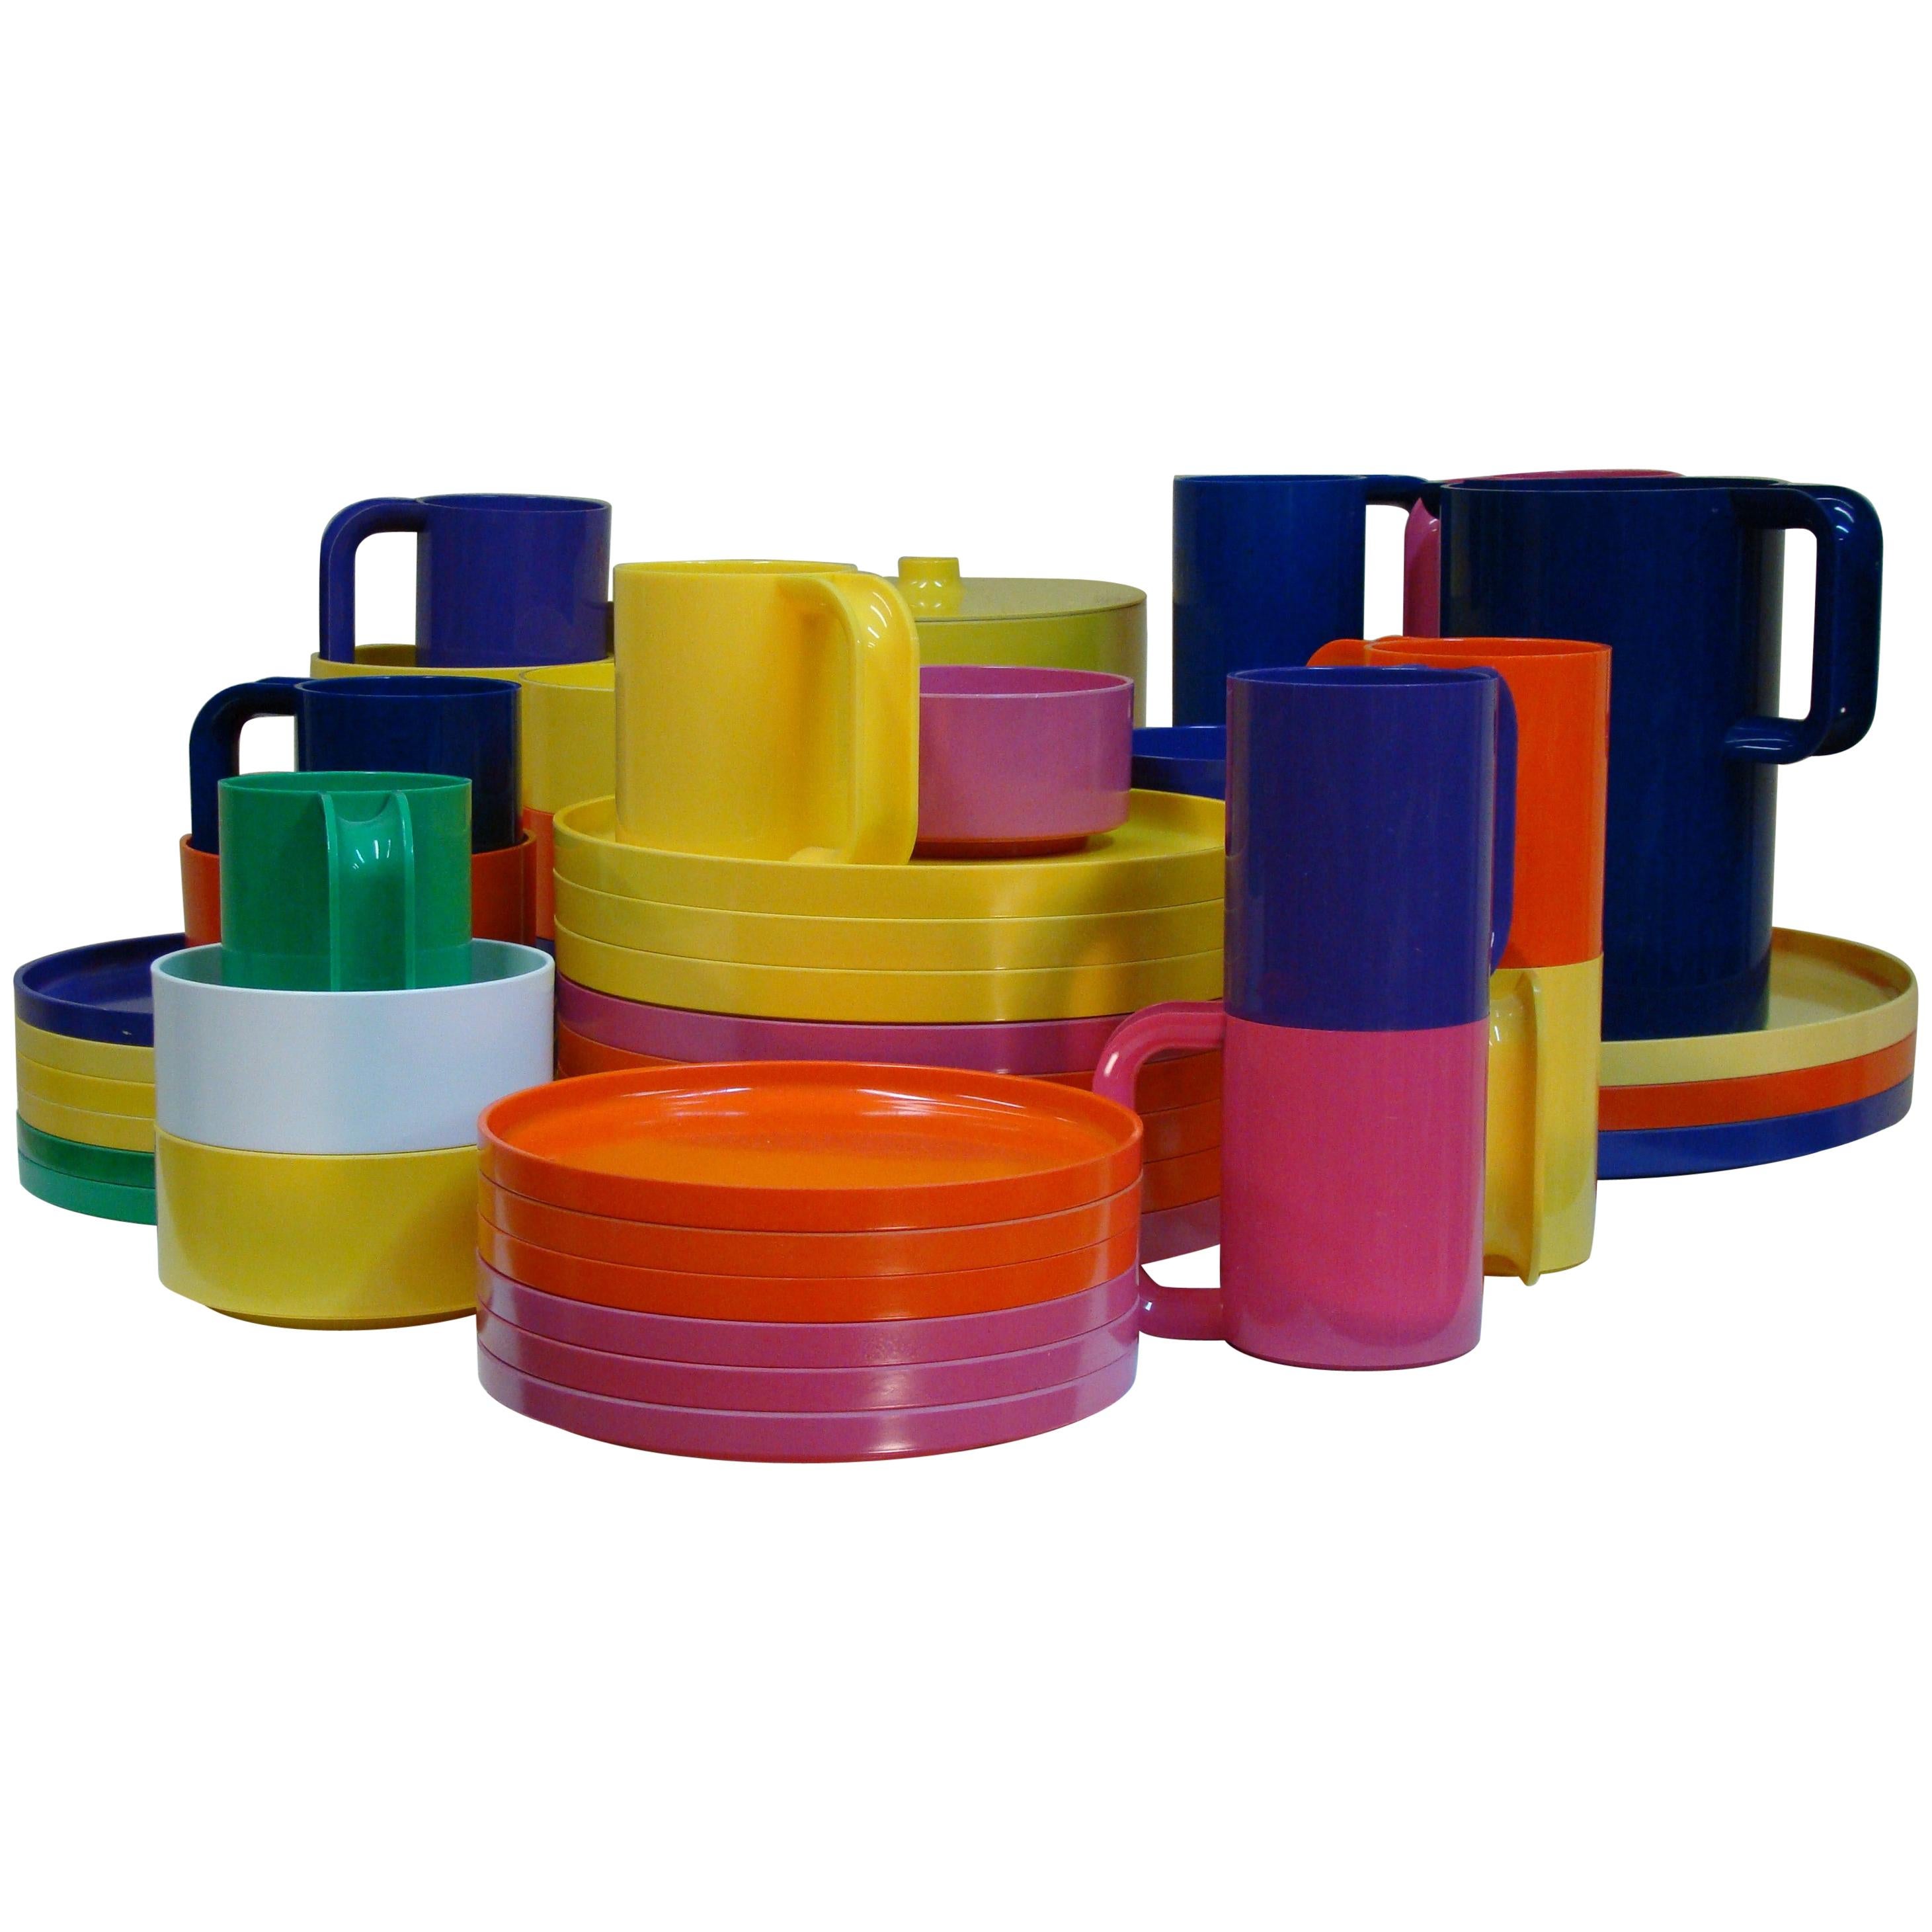 Colorful Assortment of Dinnerware by Massimo Vignelli for Heller Design